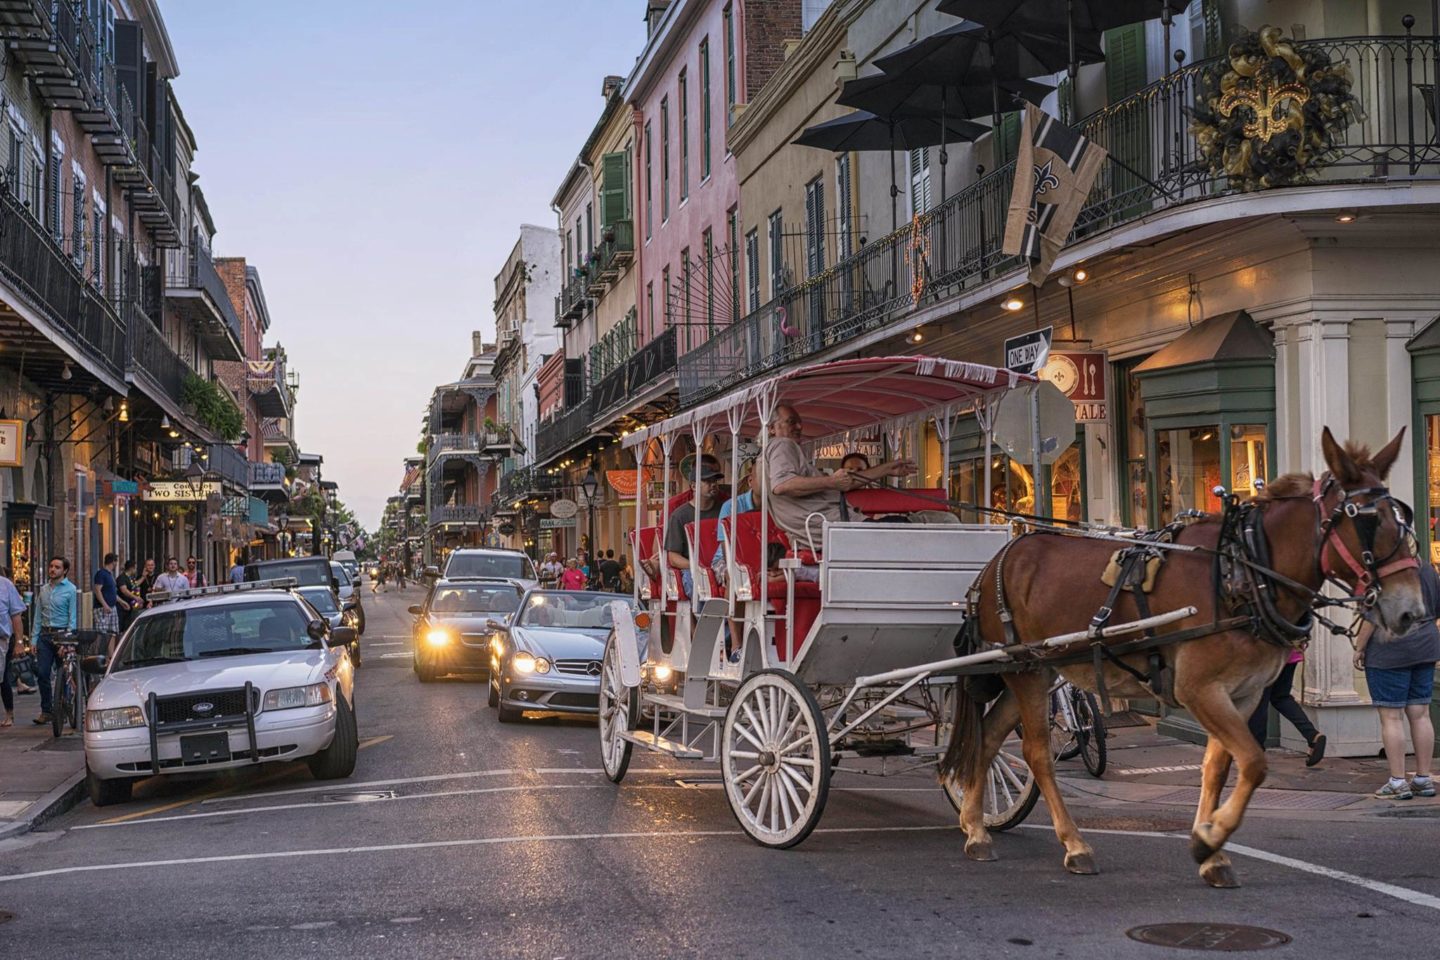 New Orleans travel guide